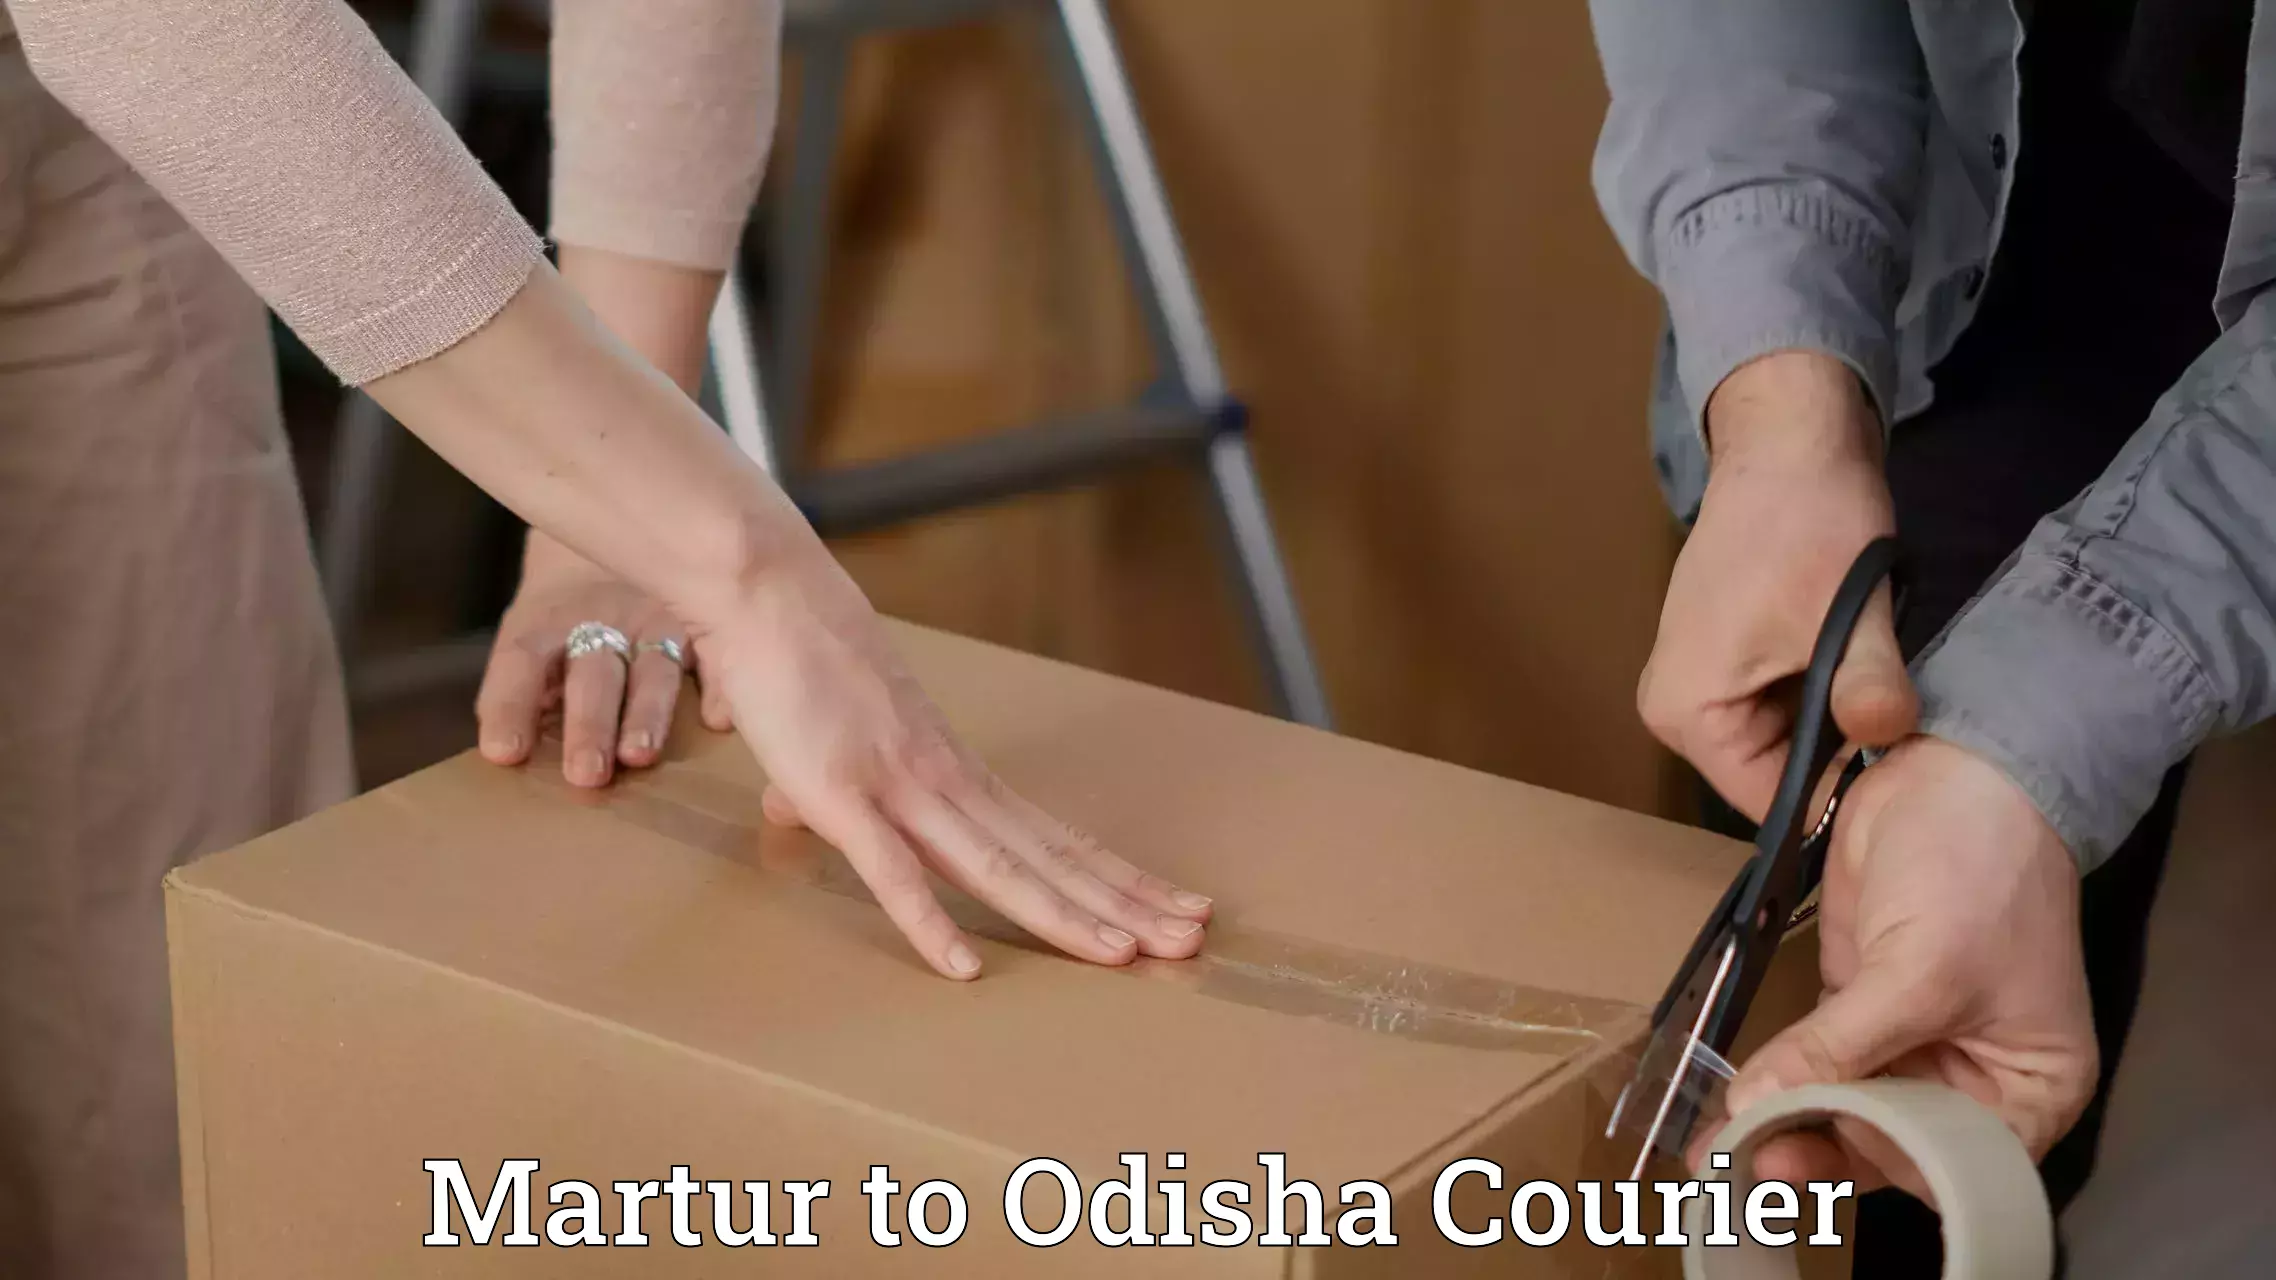 Seamless shipping experience in Martur to Odisha